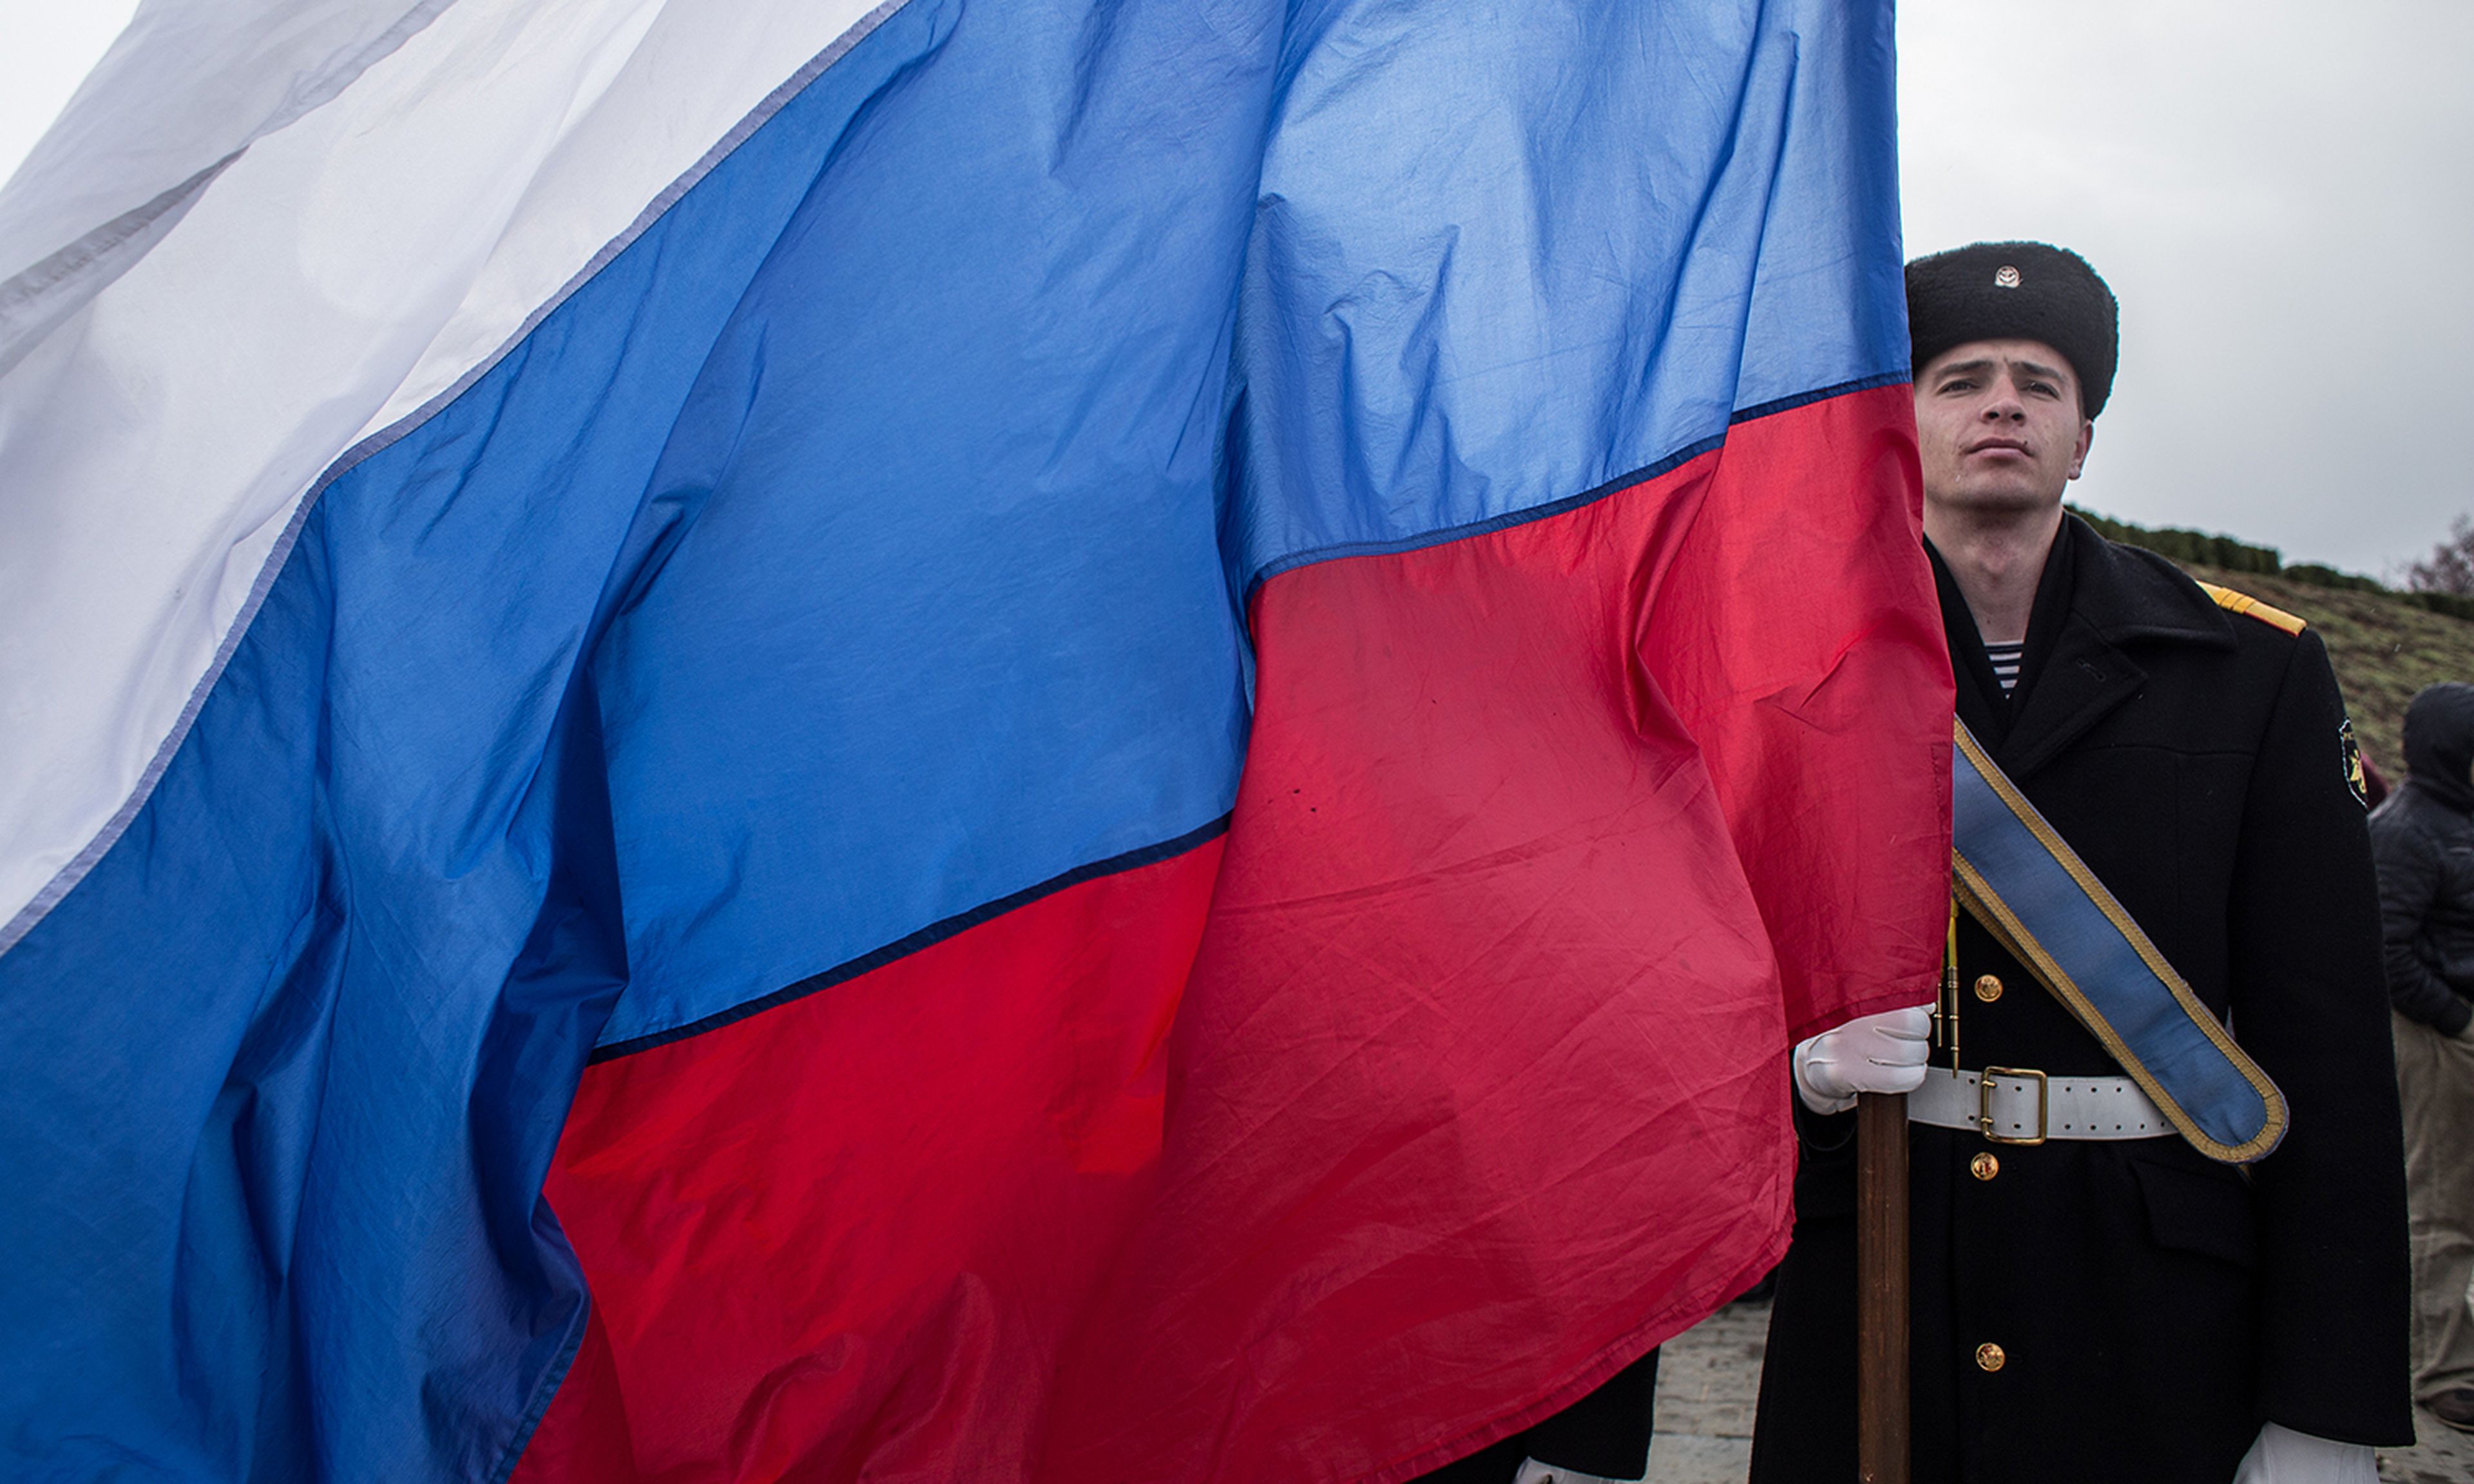 Pictured: A sailor holds a Russian flag as people celebrate the first anniversary of the signing of the decree on the annexation of the Crimea by the Russian Federation on March 18, 2015, in Sevastopol, Crimea. (Photo by Alexander Aksakov/Getty Images)